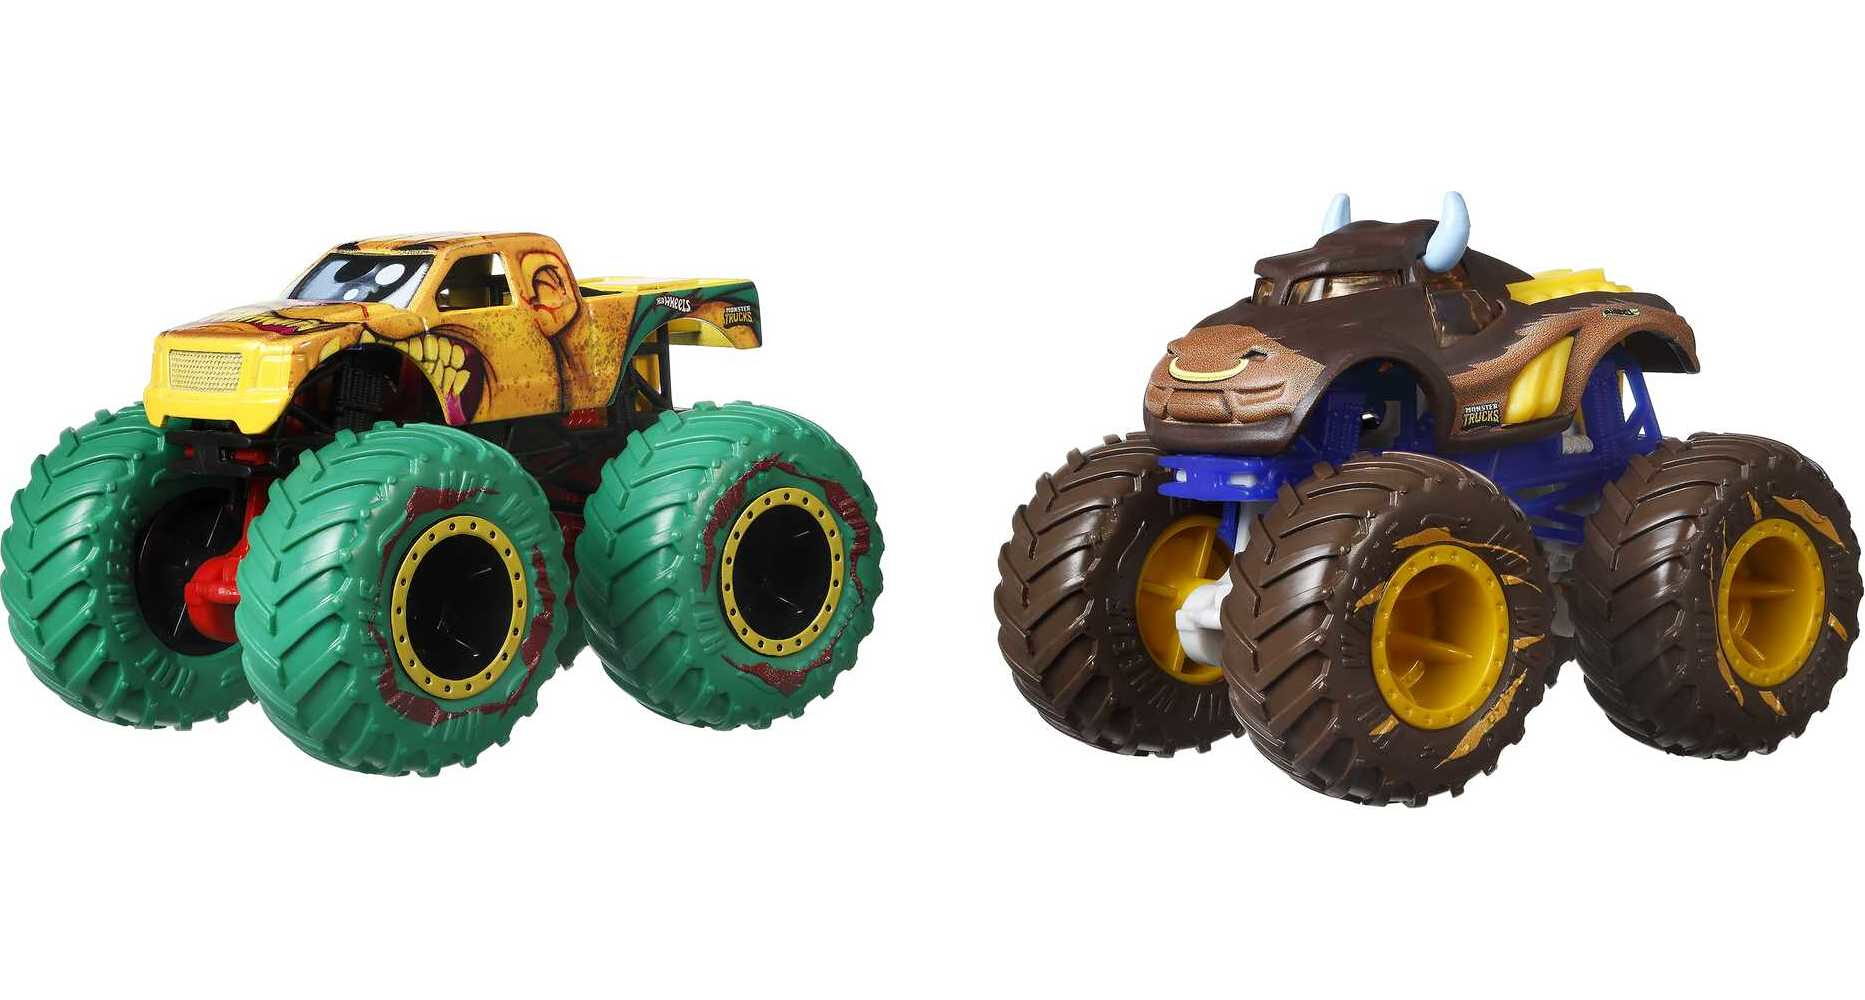 Hot Wheels Monster Trucks Roarin' Rumble 2-Pack of 1:64 Scale Toy Trucks (Styles May Vary) - image 1 of 4